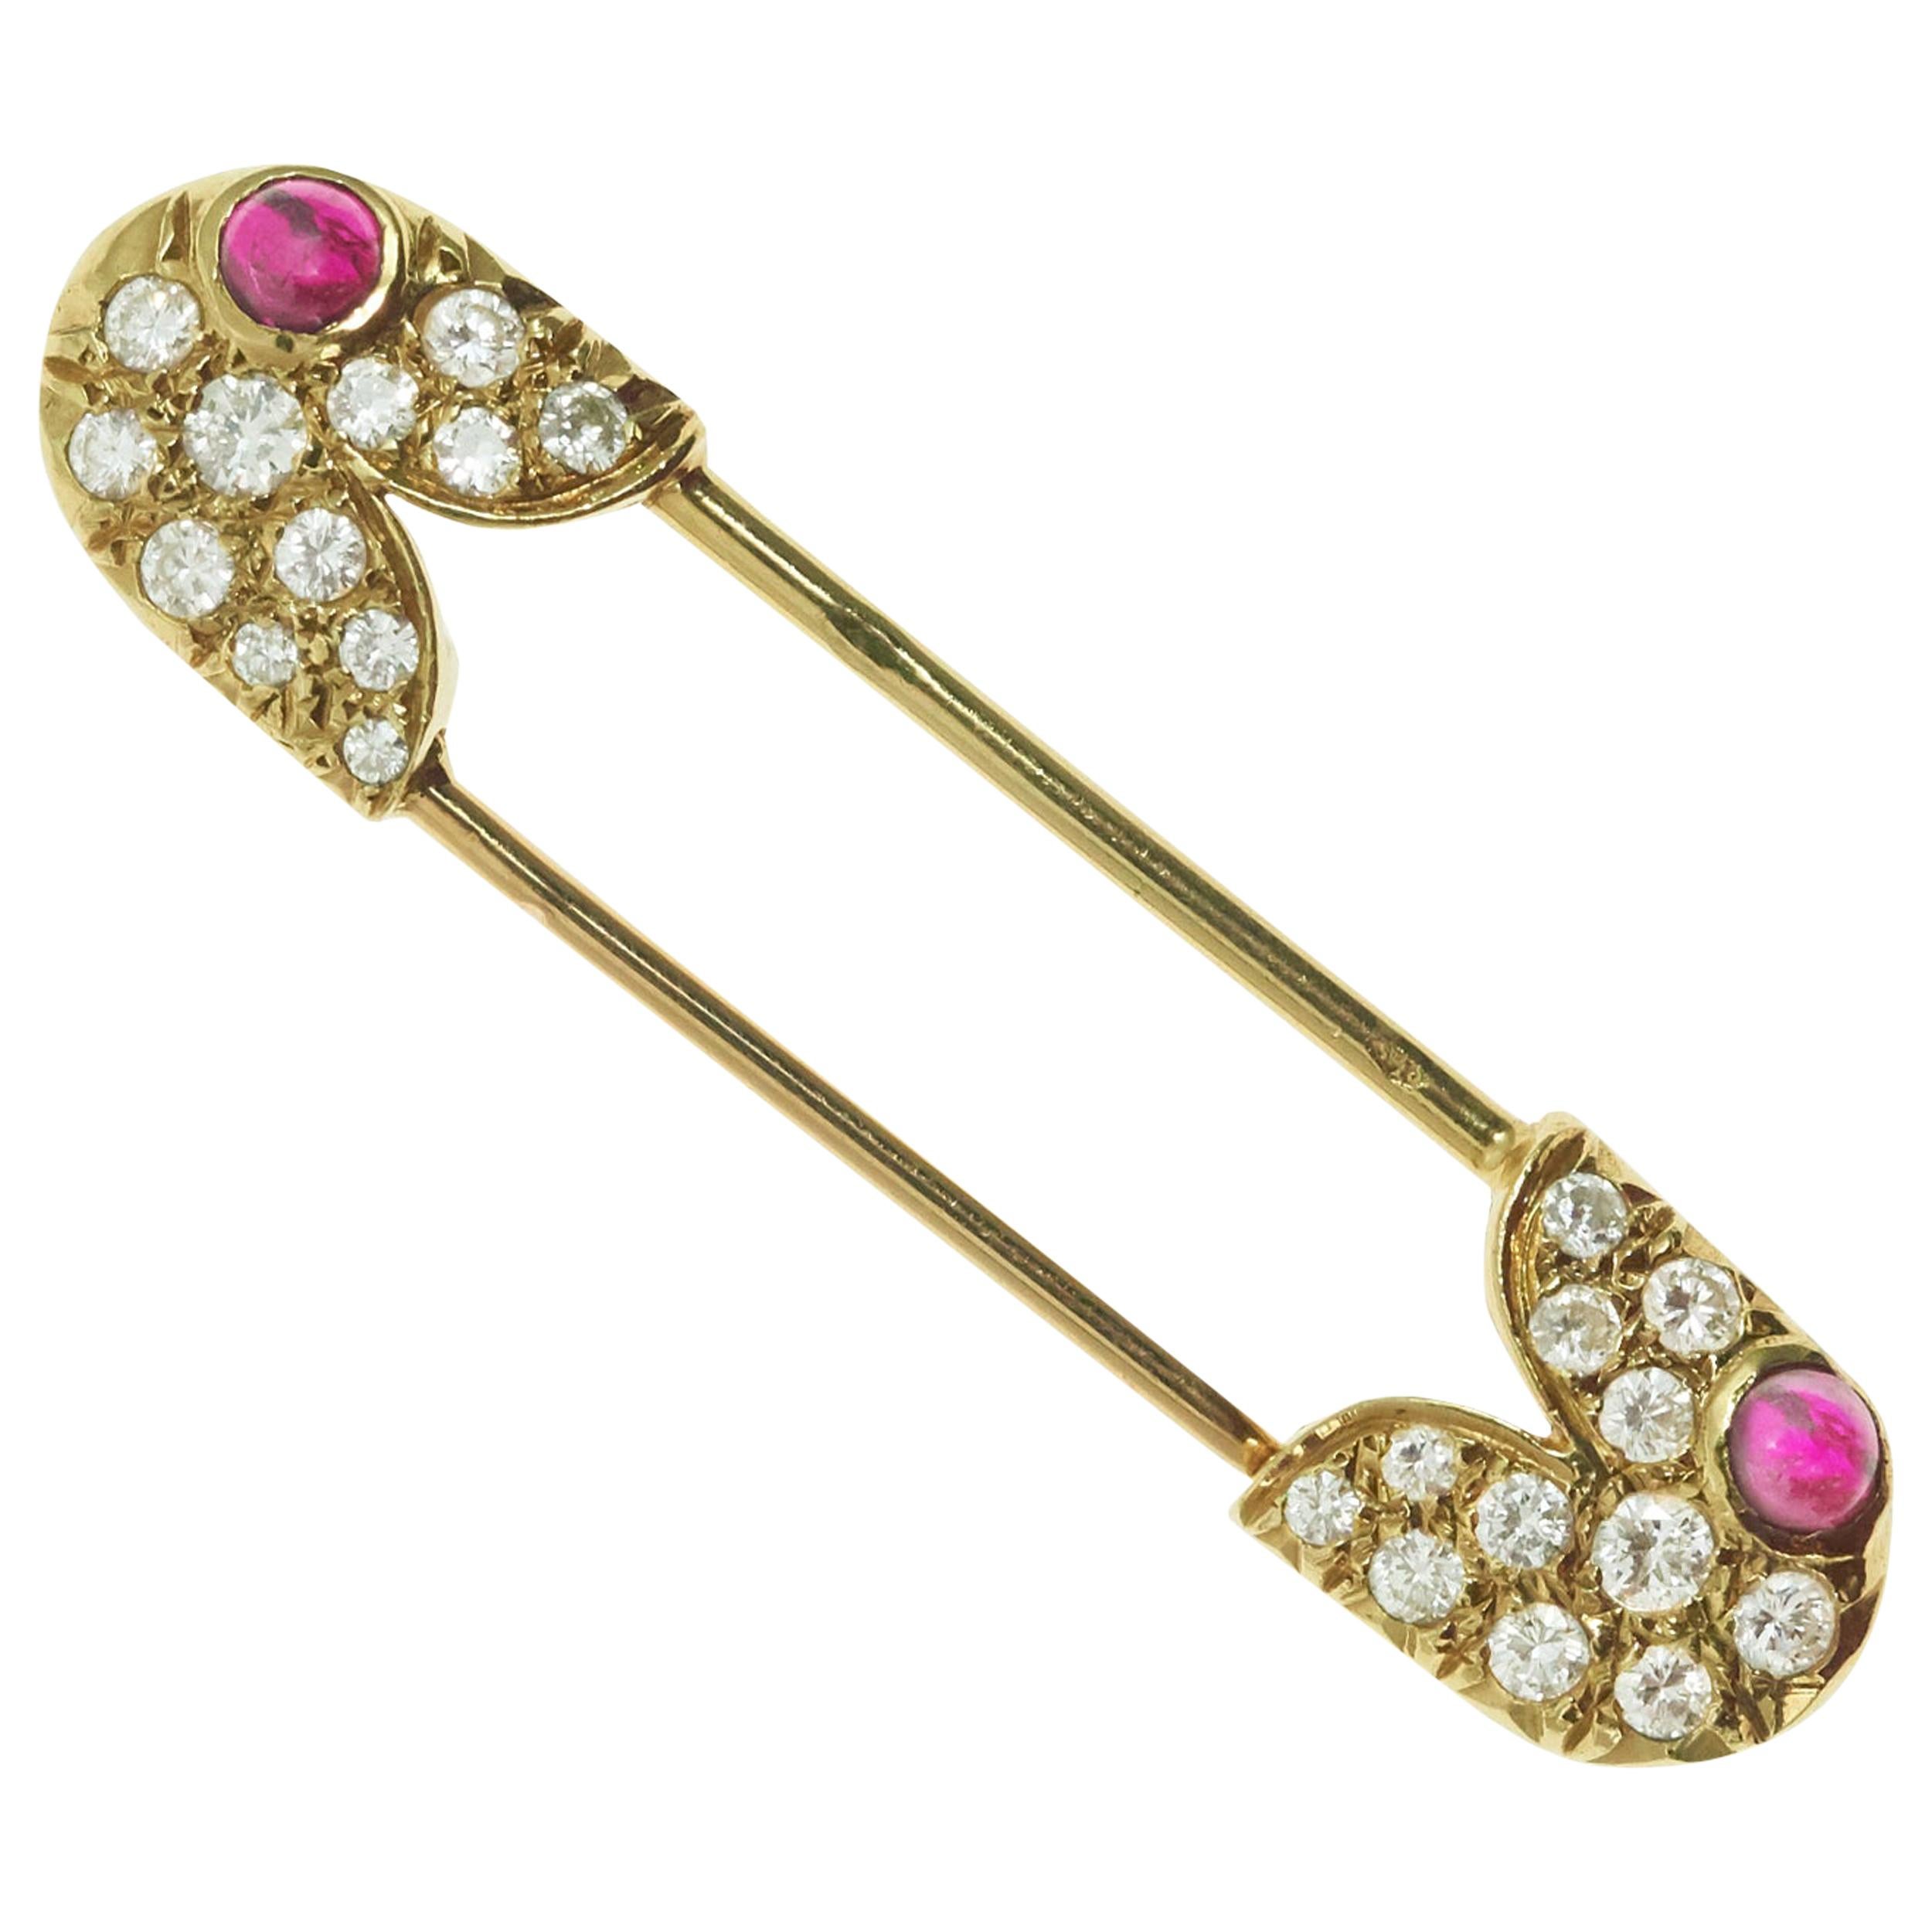 1978 Van Cleef & Arpels Diamond, Ruby and Gold Safety Pin